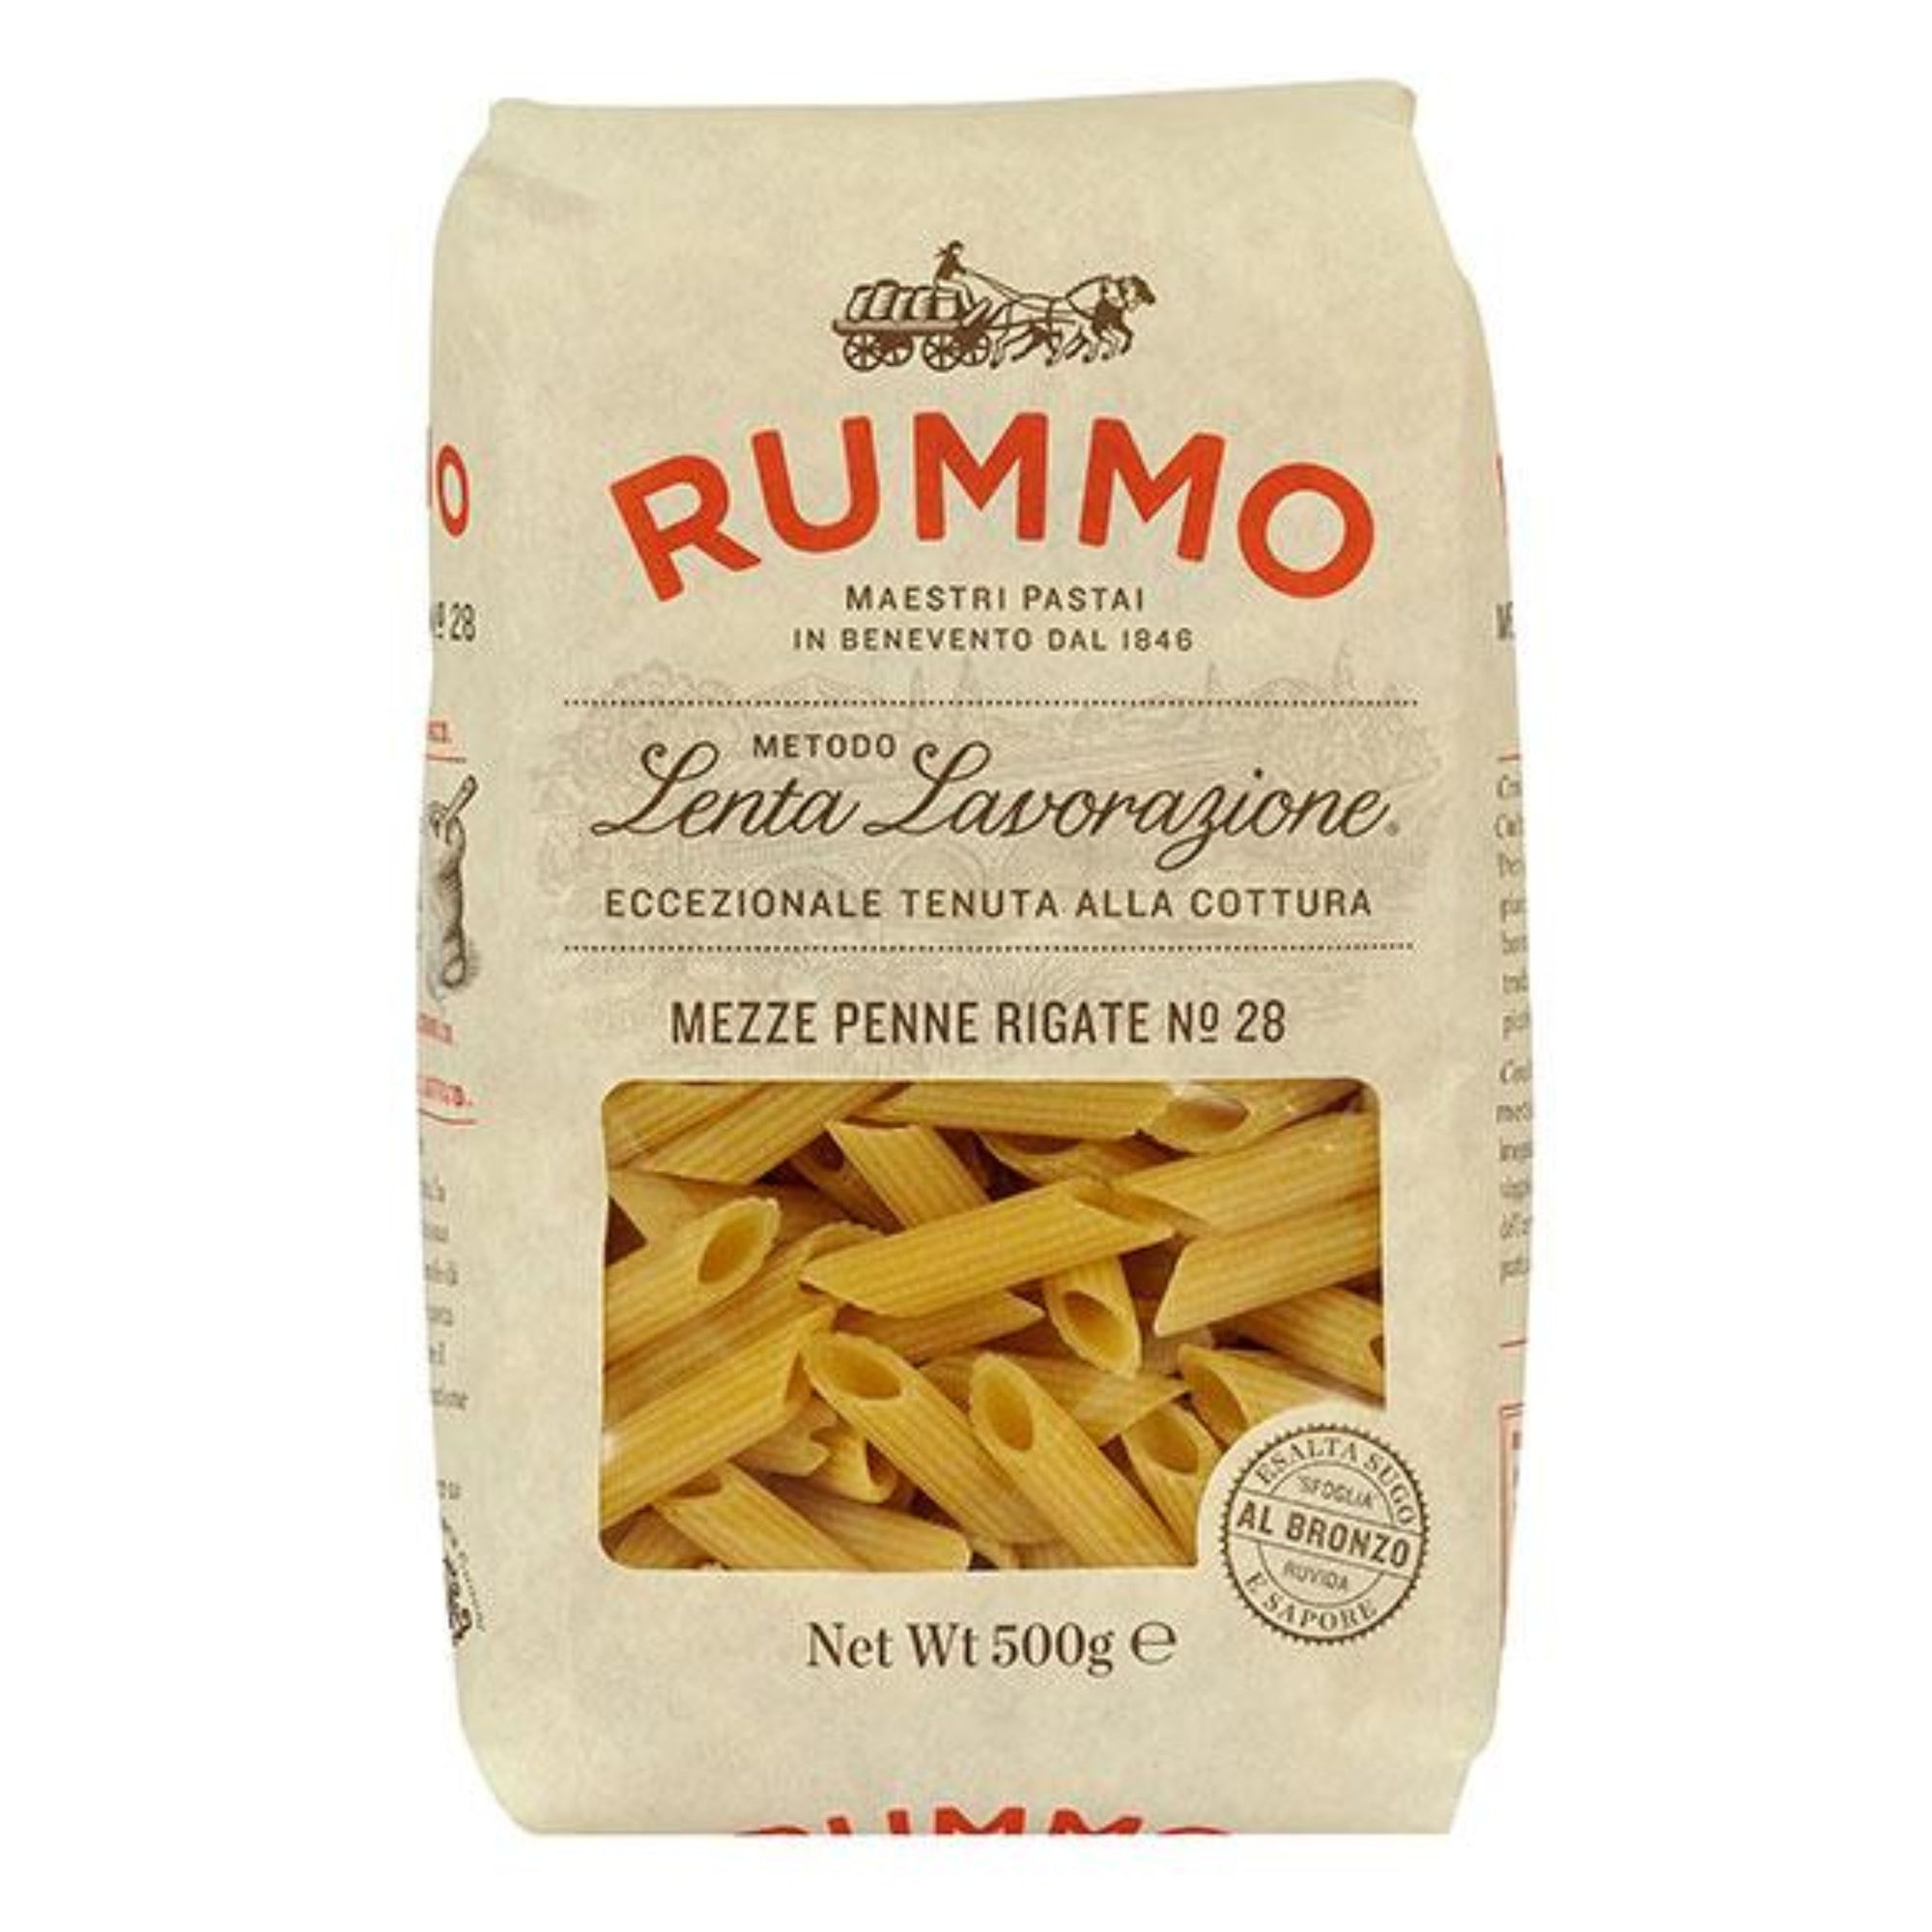 Penne Rigate 'Rummo' 500g